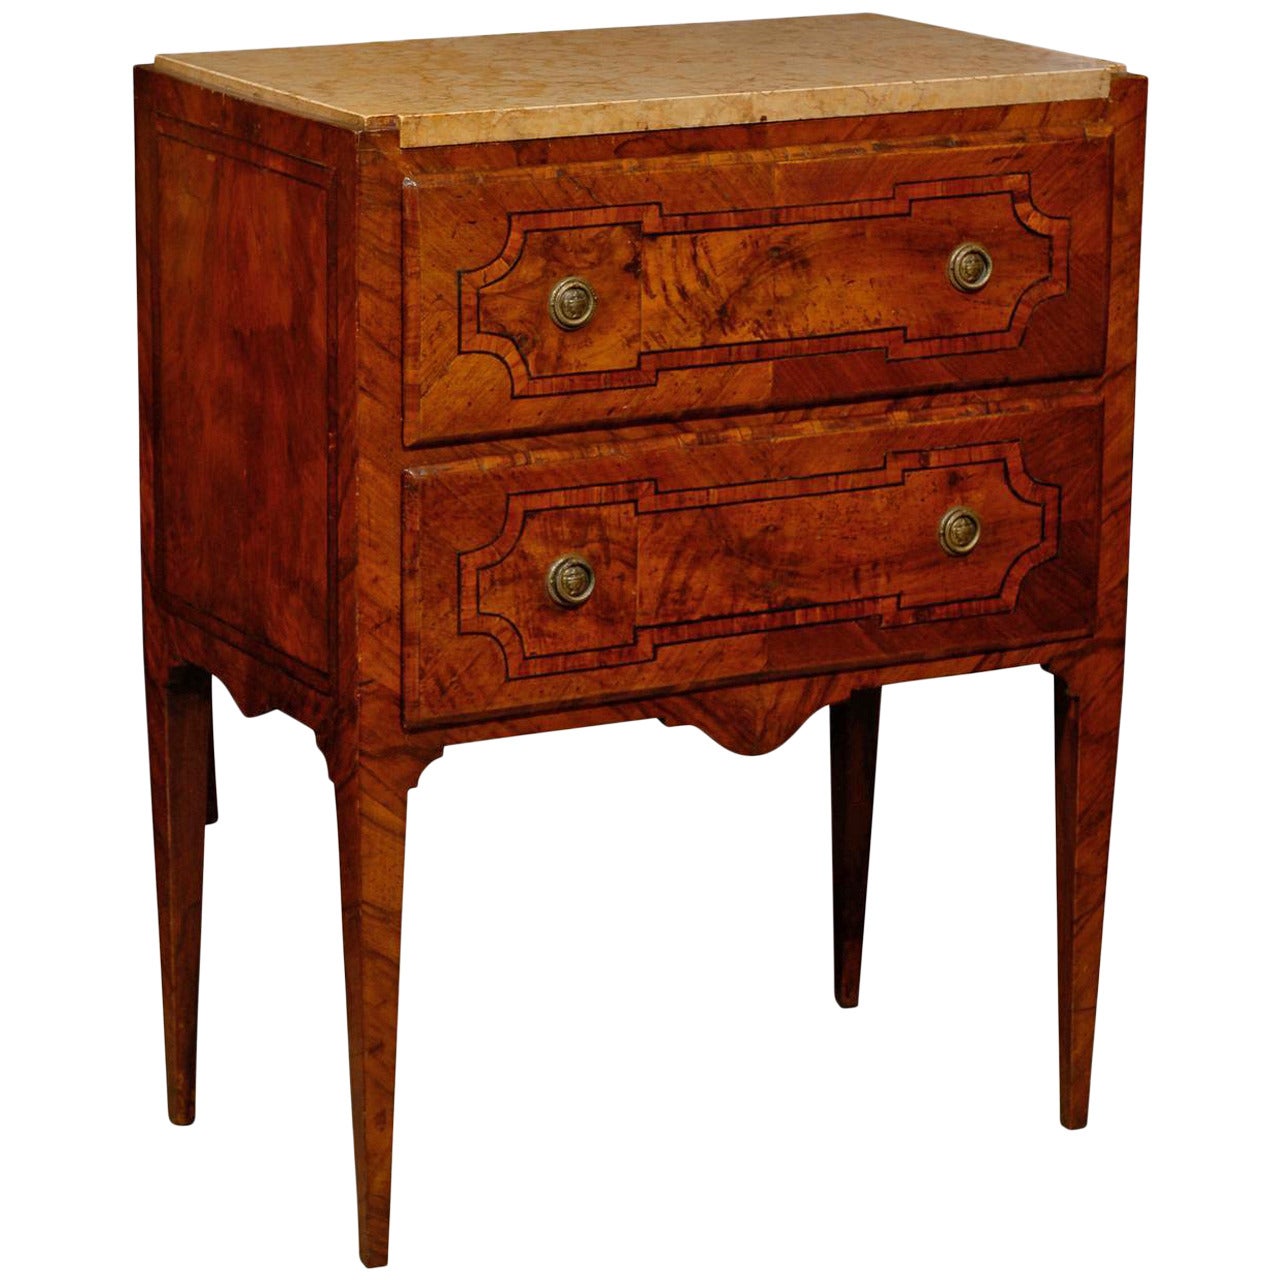 Petite Neoclassical Style Italian Inlaid Commode with Marble Top and Two Drawers